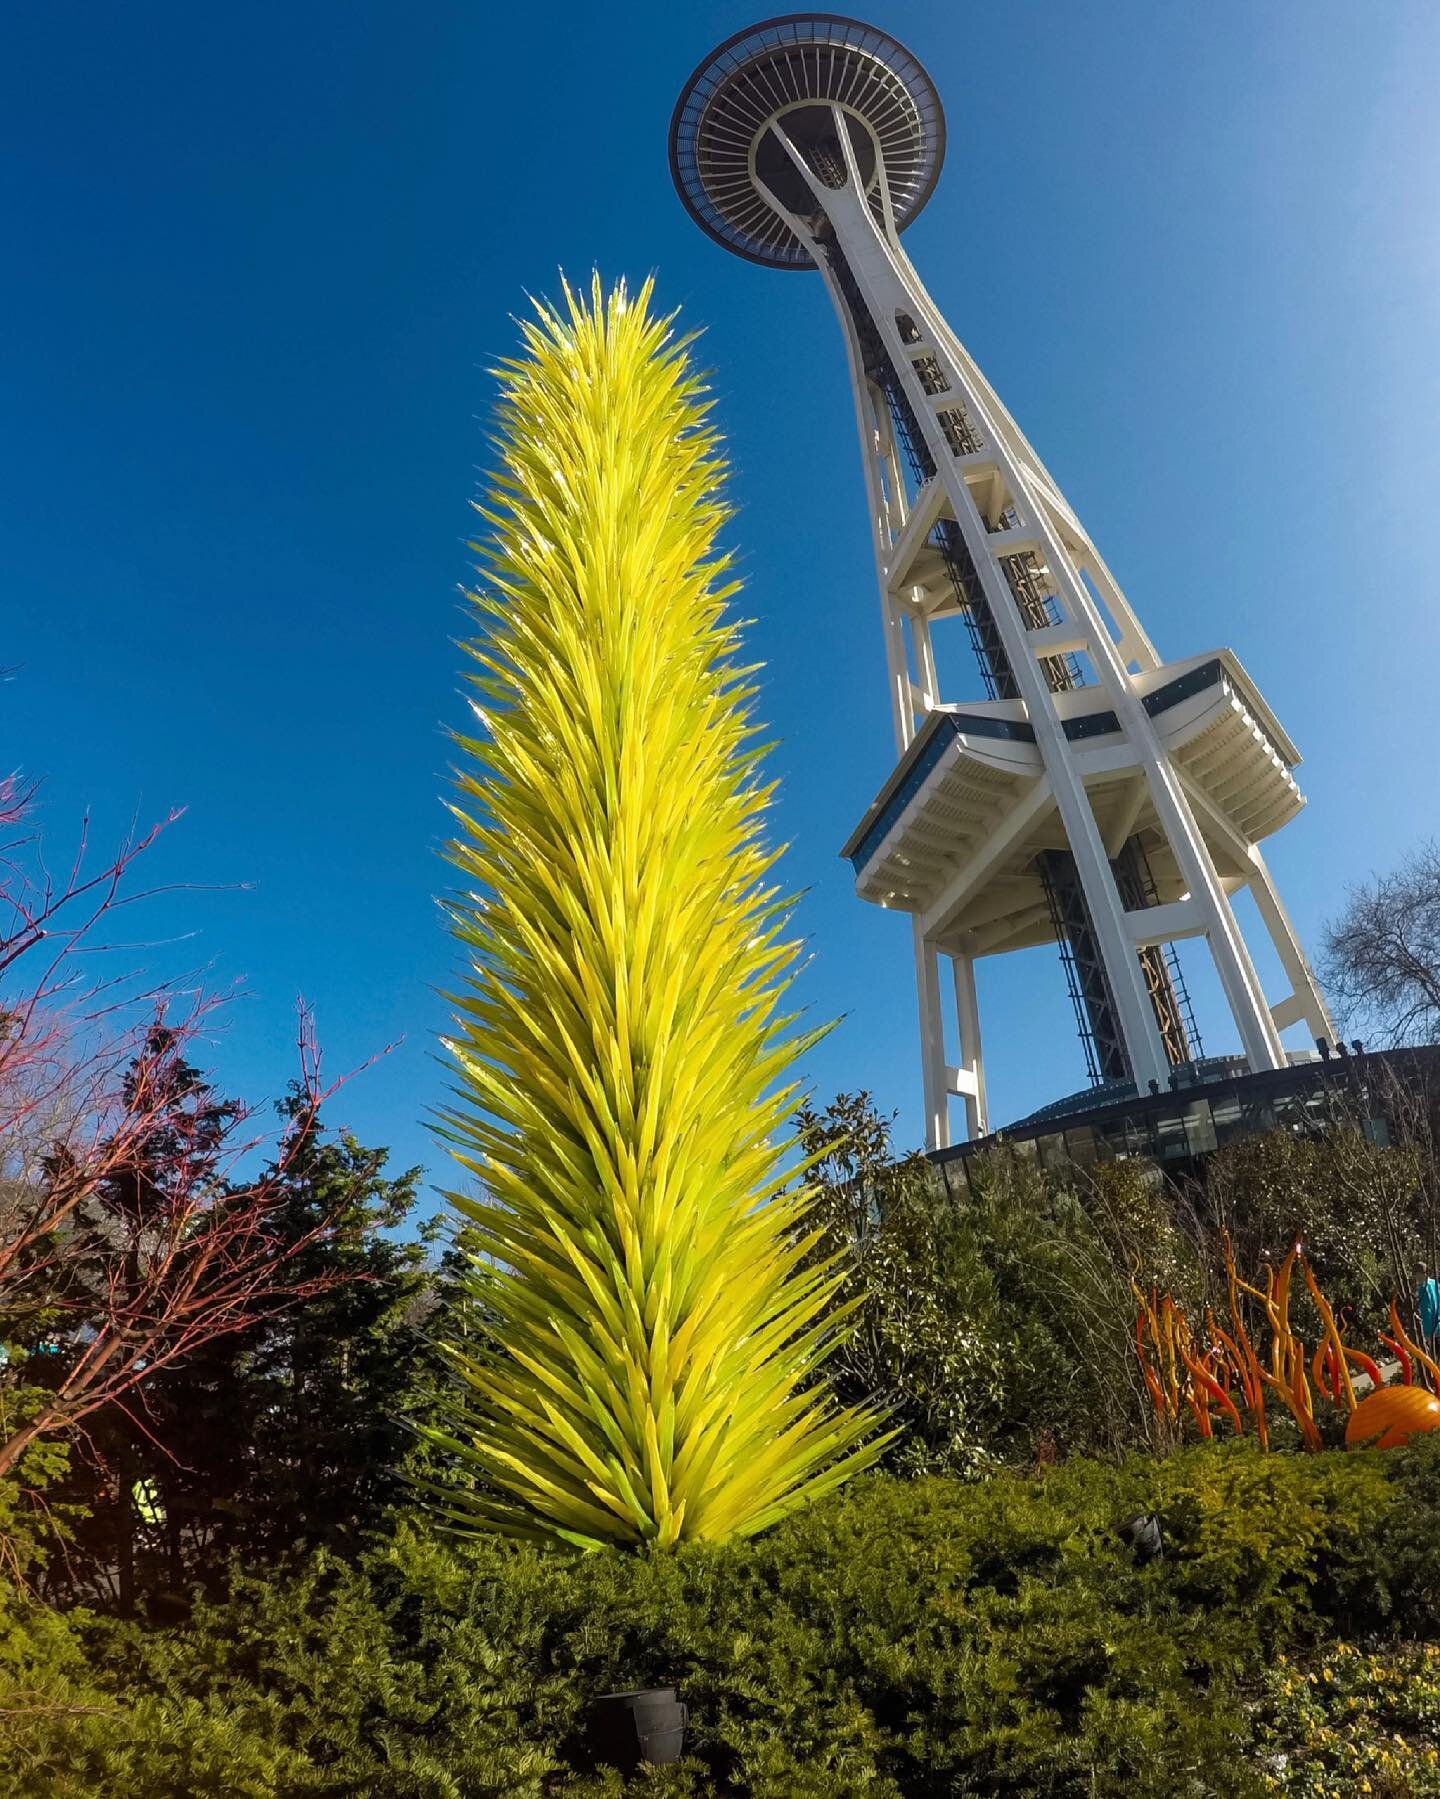 Views of the Space Needle at Chihuly Glass and Garden in Seattle 😍

#seattle #chihuly #washington #artexhibit #chihulyglass